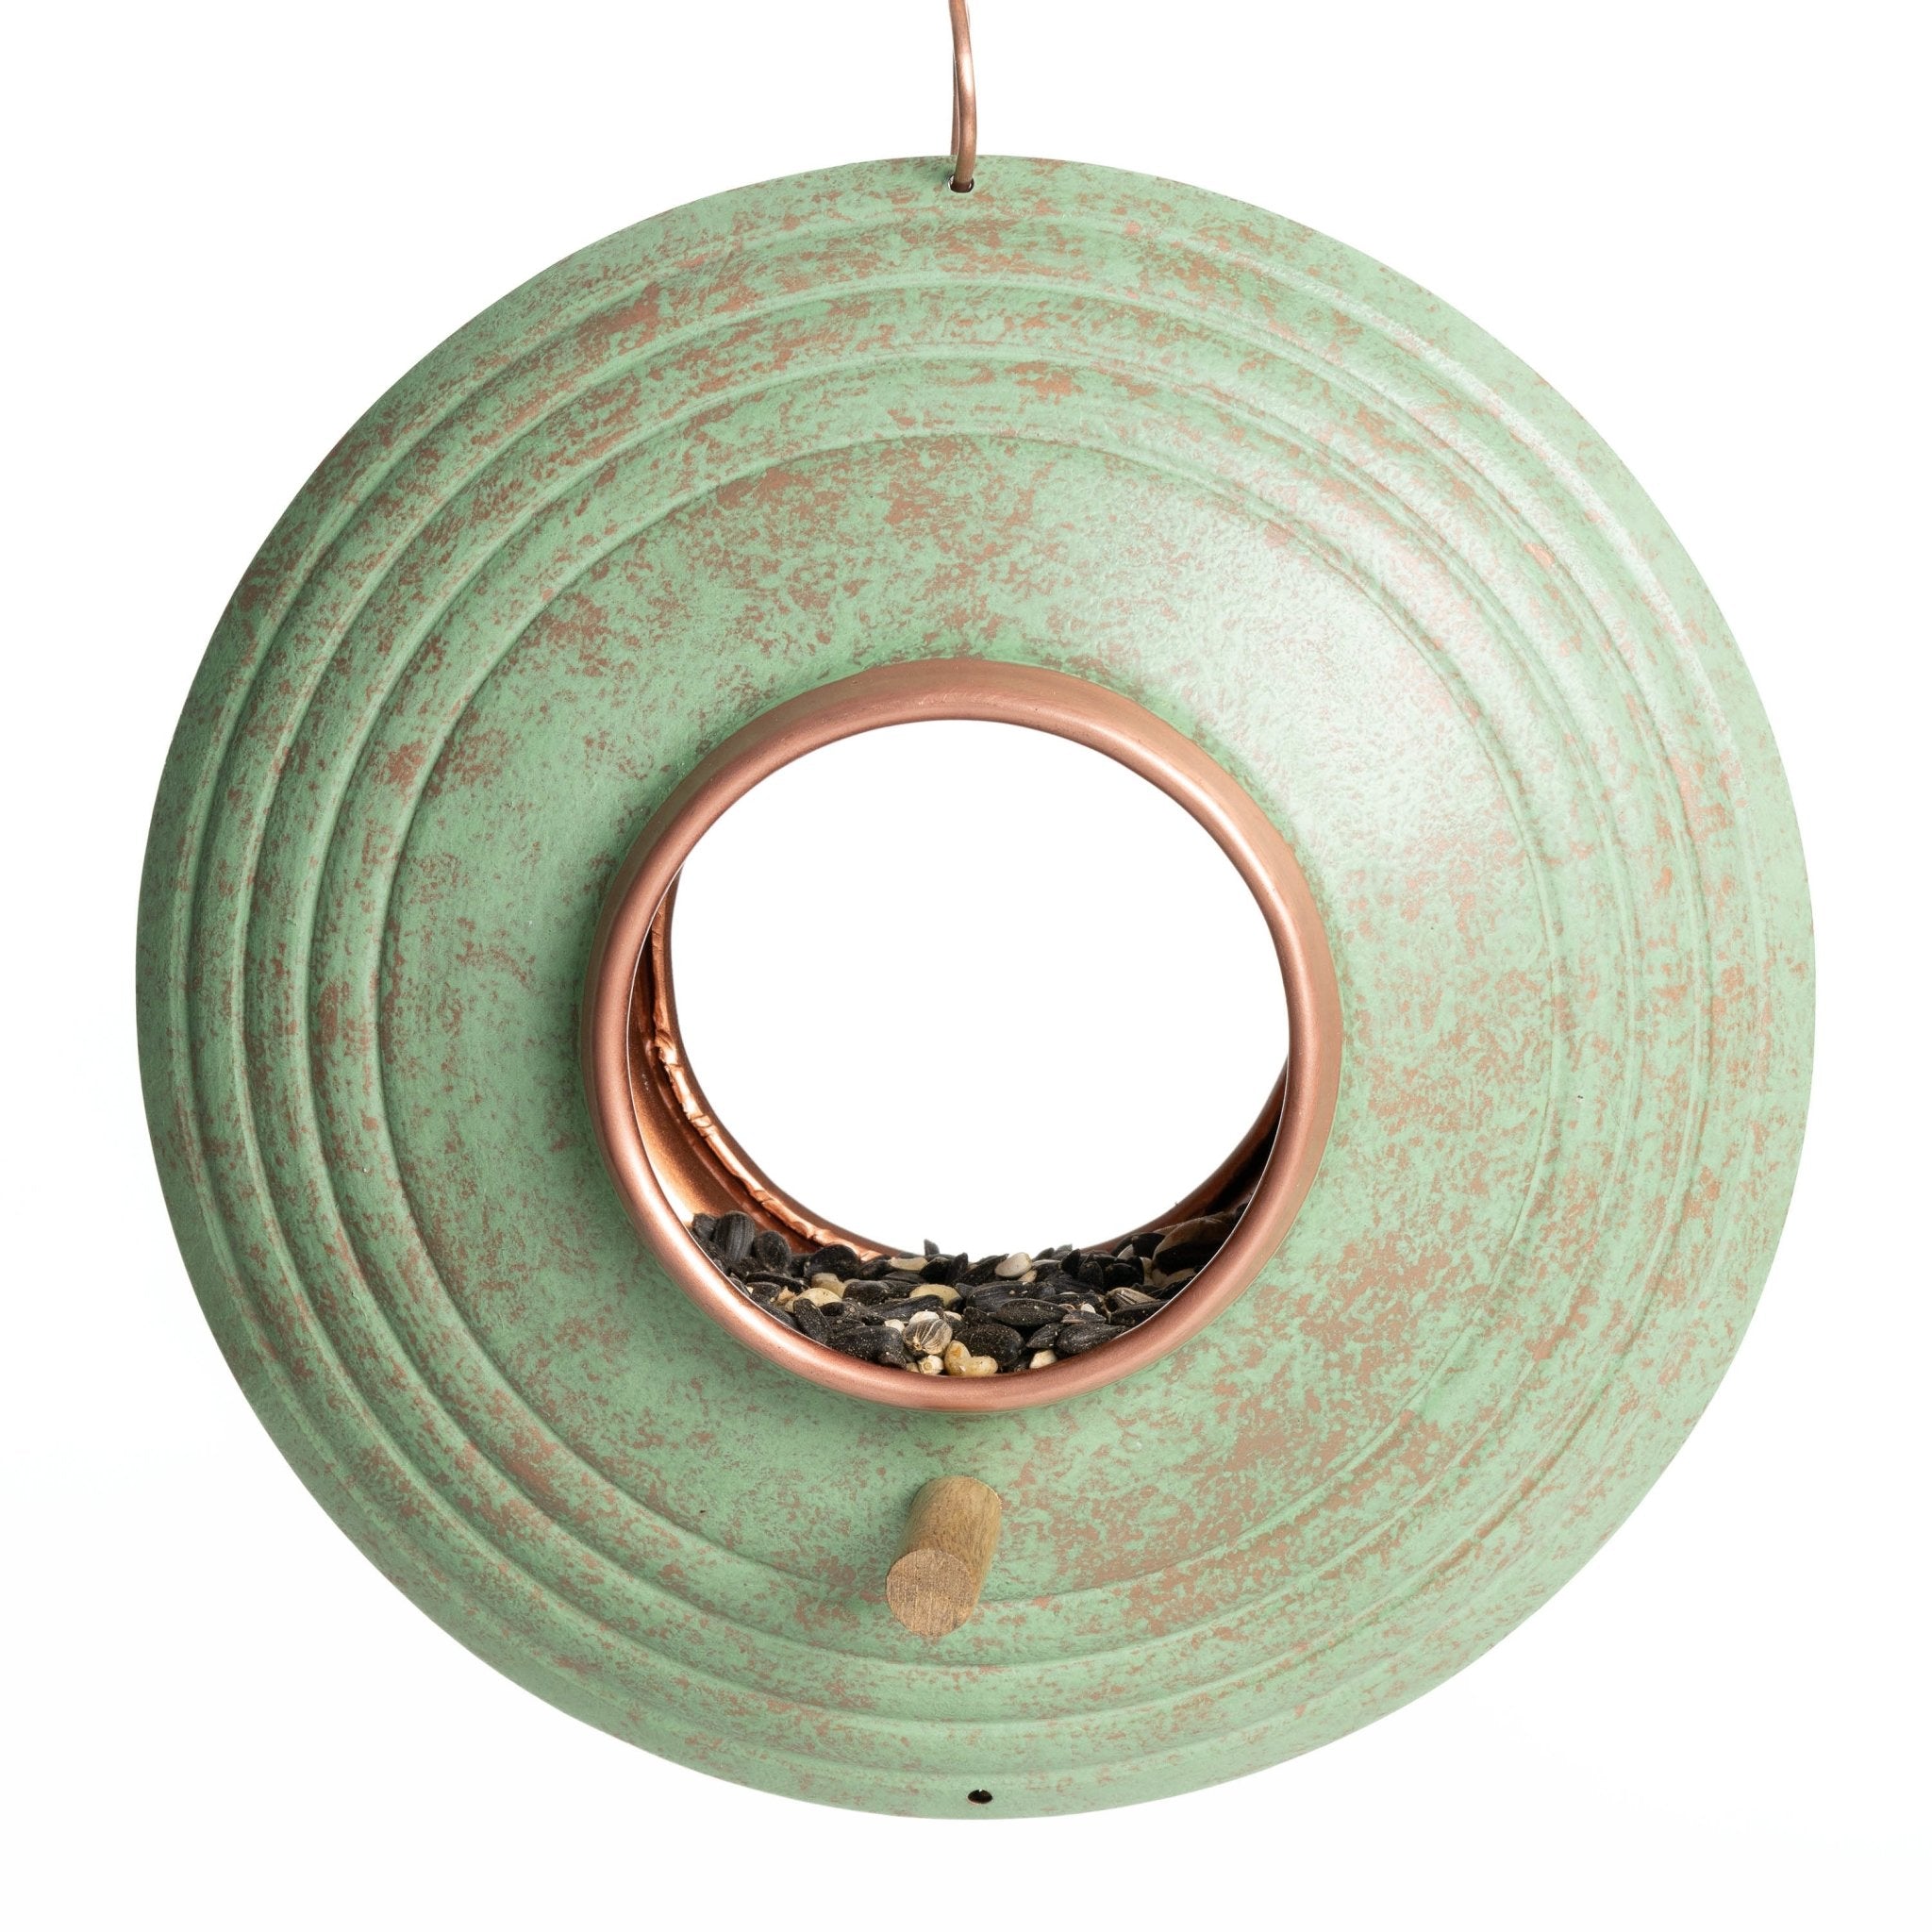 Verde Fly-Thru ™ Bird Feeder, Copper Accents, Multiple Perches - Good Directions